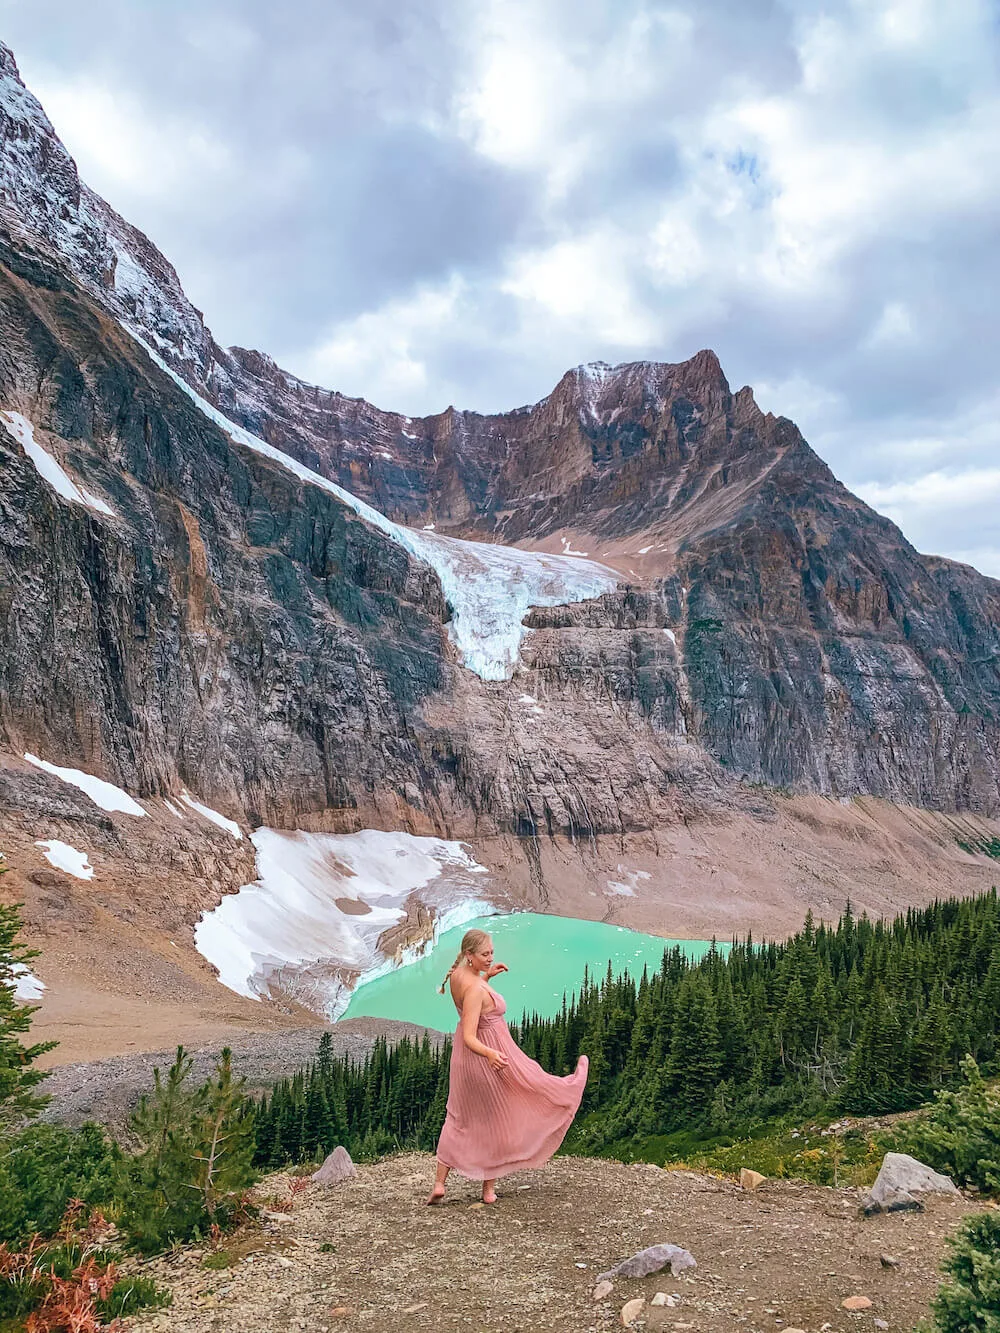 Planning a trip to Jasper National Park soon? Here's a local's guide to some of the best things to do in Jasper. From hikes and trails to adventure sports, family friendly excursions, dining experiences and more. You won't want to miss this guide of the best things to do and places to see in Jasper. Pictured here: Mount Edith Cavell